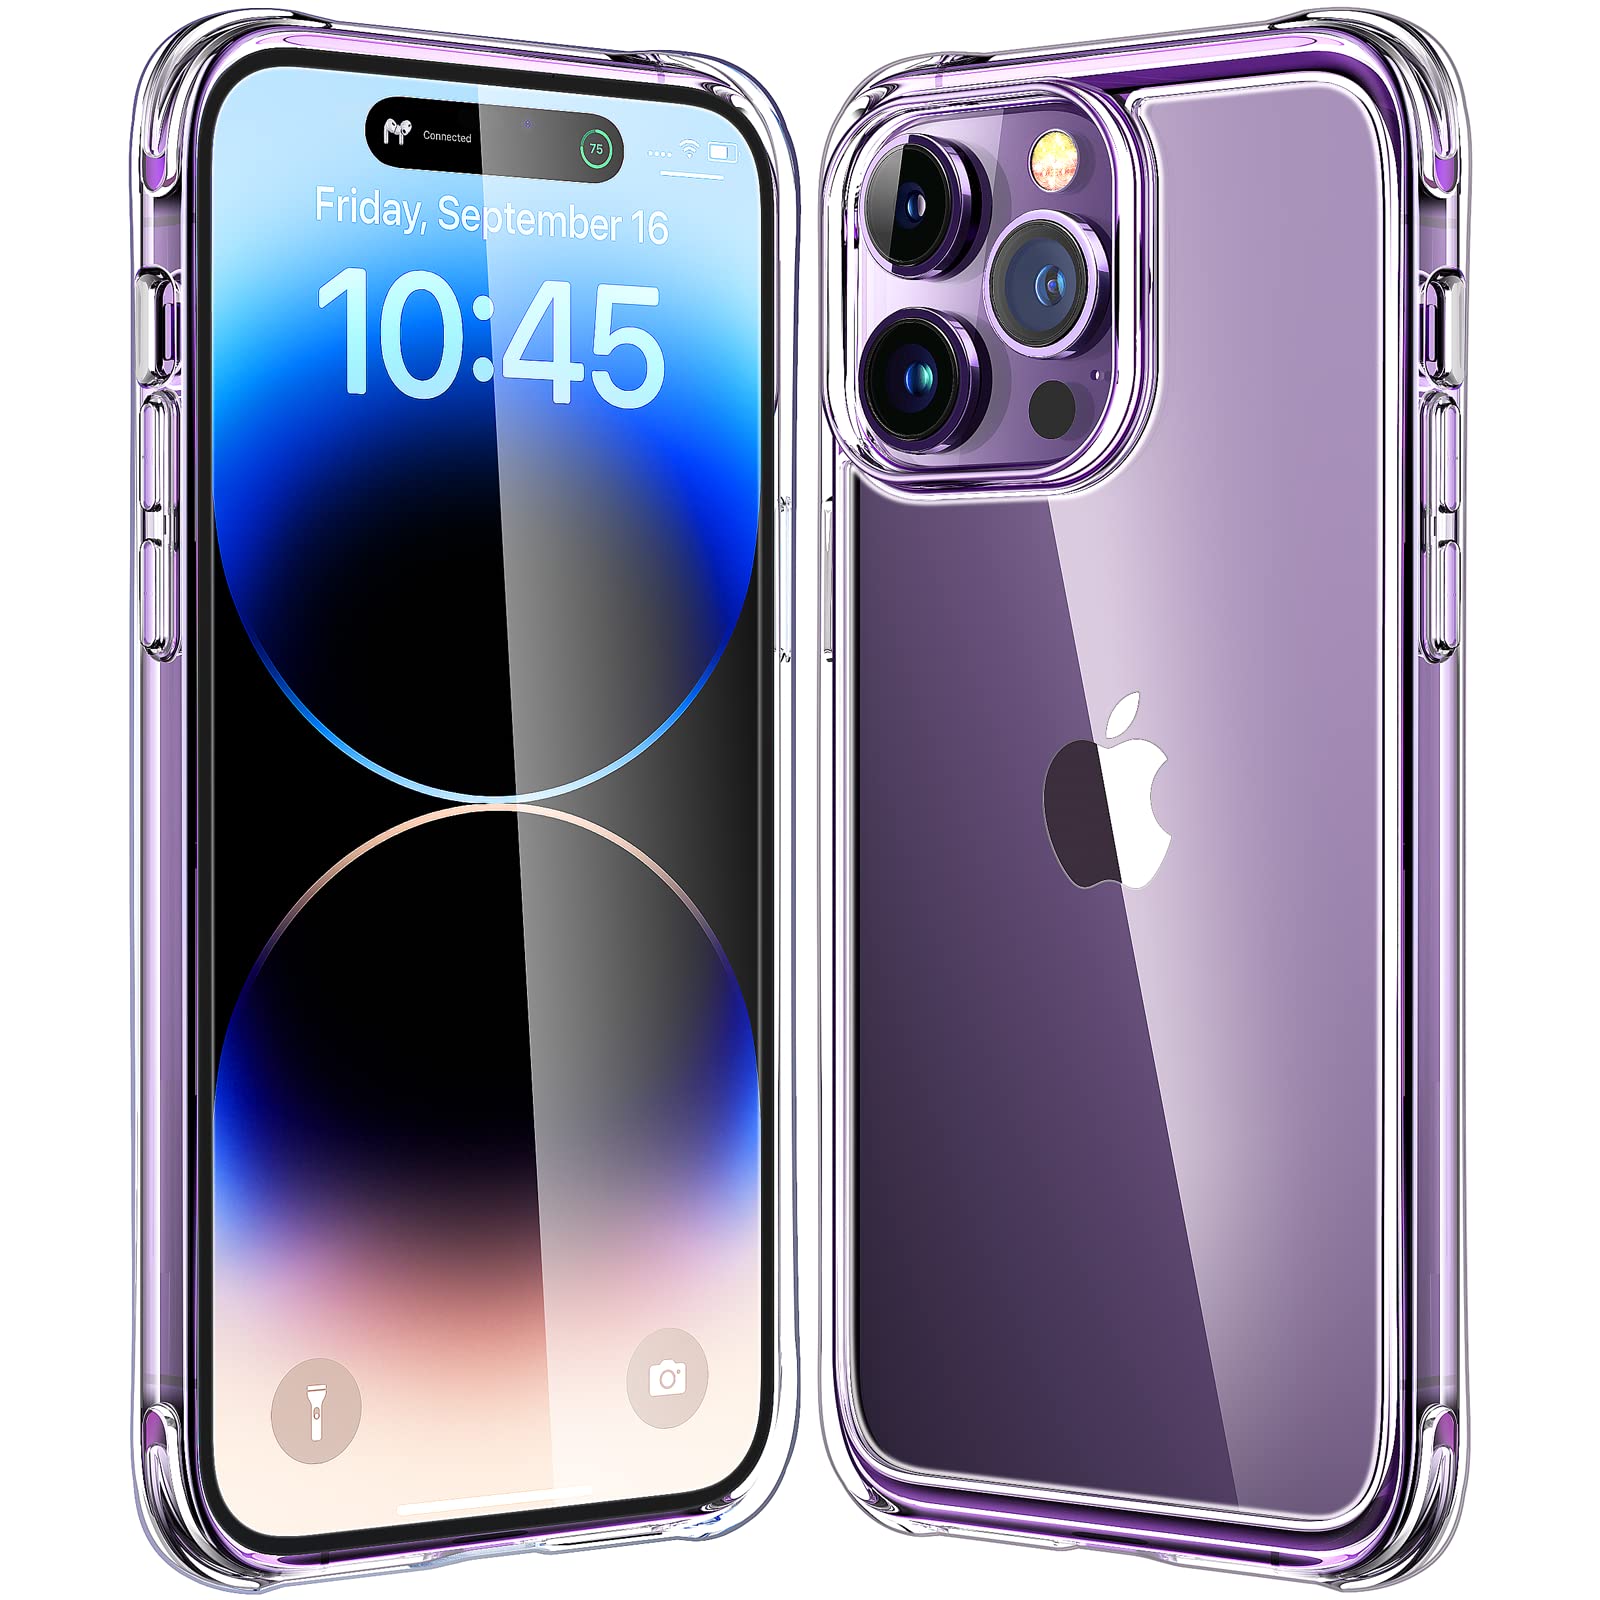 The best iPhone 14 and iPhone 14 Pro cases